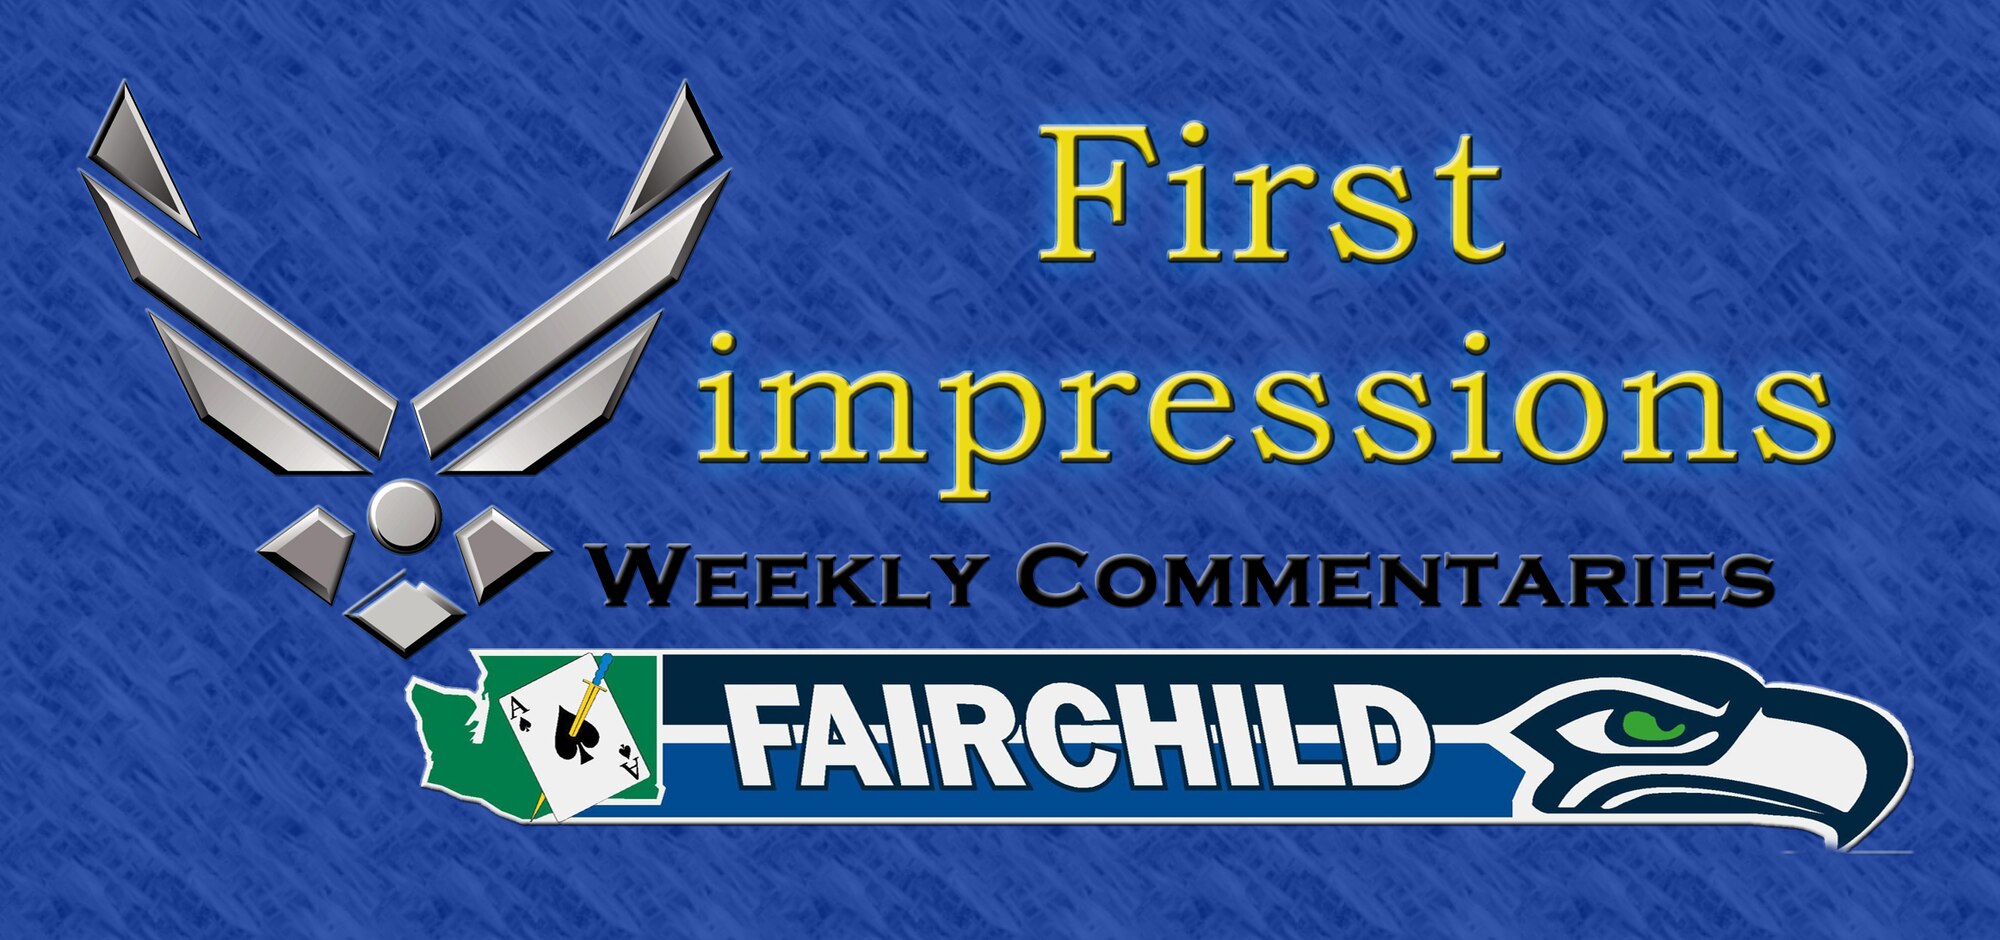 Weekly, Fairchild leadership writes commentaries focused on a wide arrary of topics important to all servicemembers. (U.S. Air Force graphic by Senior Airman Benjamin Stratton/Released)